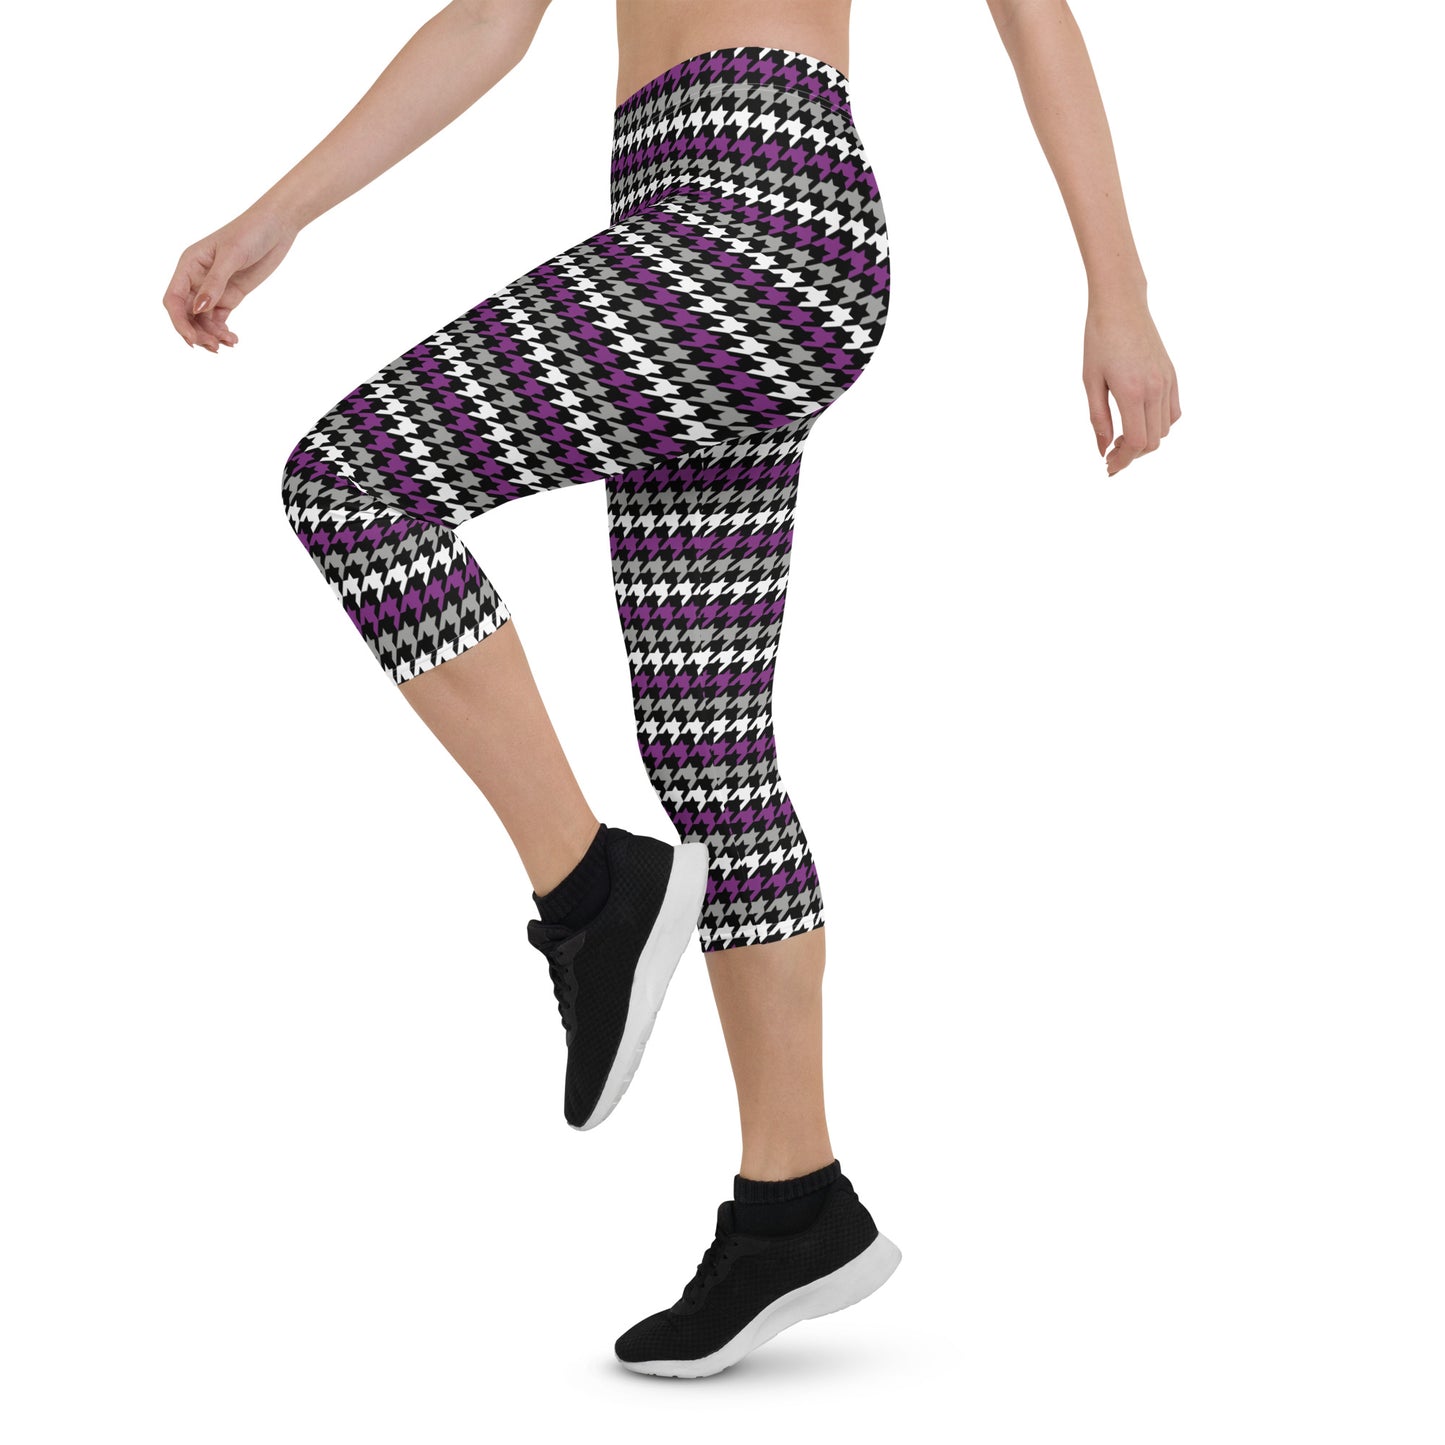 Asexual Pride Capri Leggings - LGBTQIA Black, Gray, Purple, and White  Flag Activewear Pants - Parade Club Vacation Running Workout